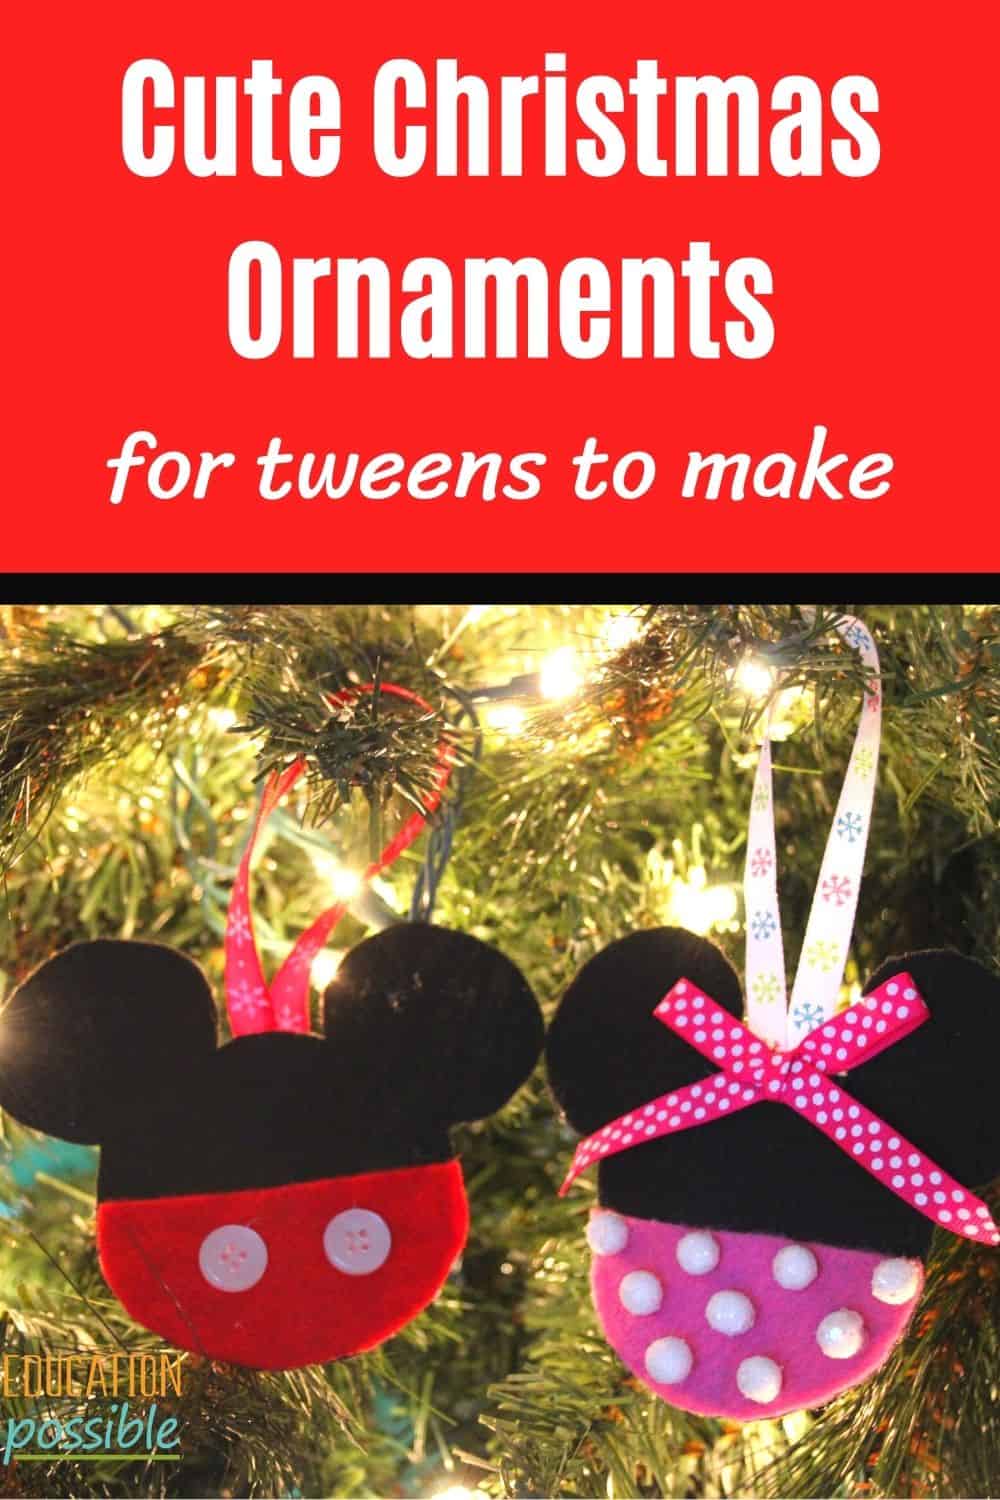 Mickey and Minnie Mouse felt silhouette ornaments hanging on a tree.